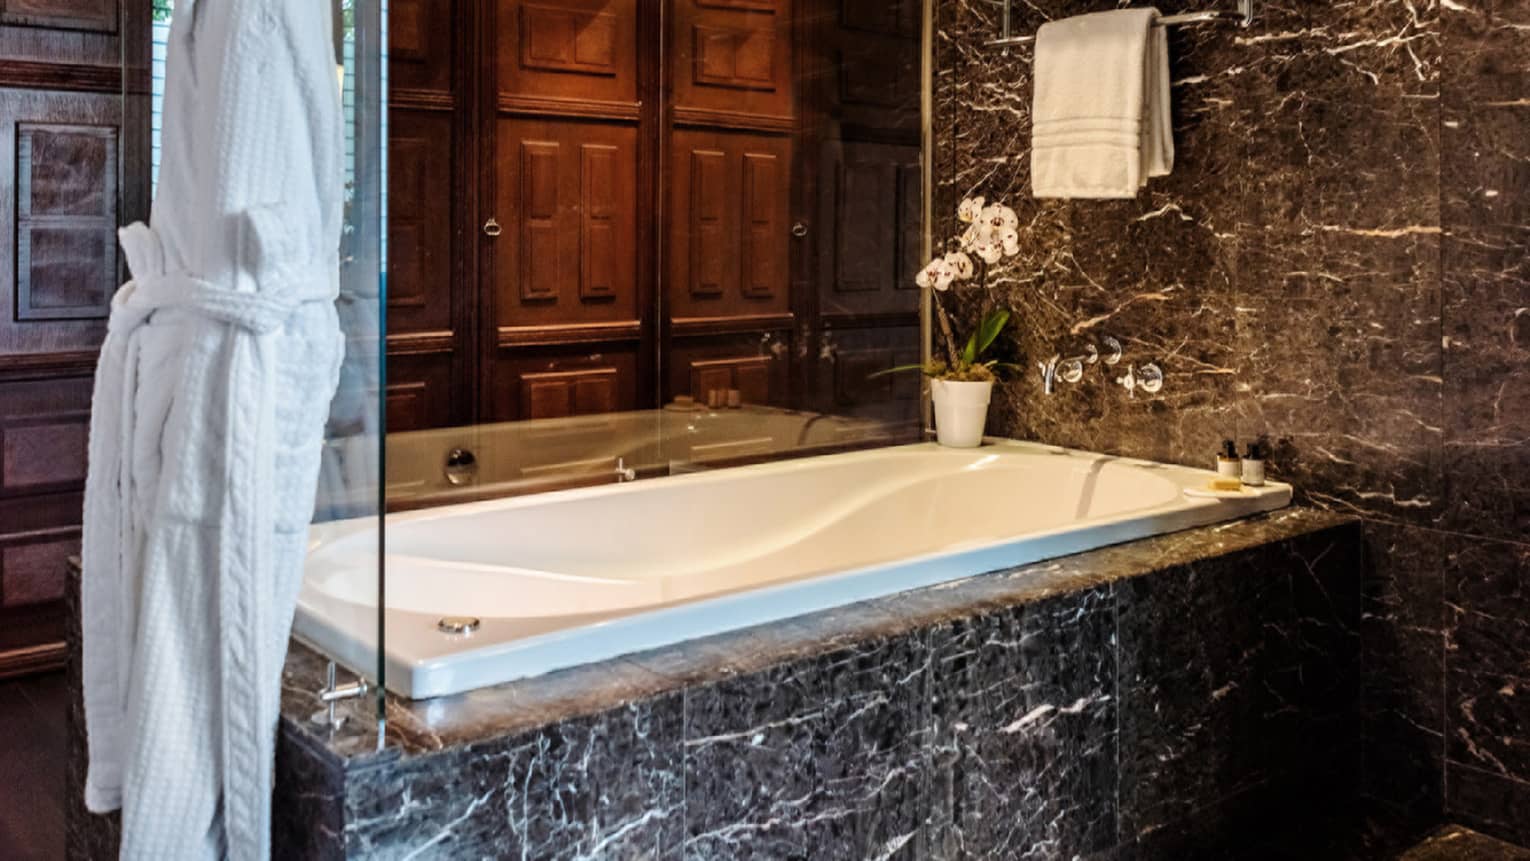 Black marble tub enclosed by glass, with hanging white bathrobe